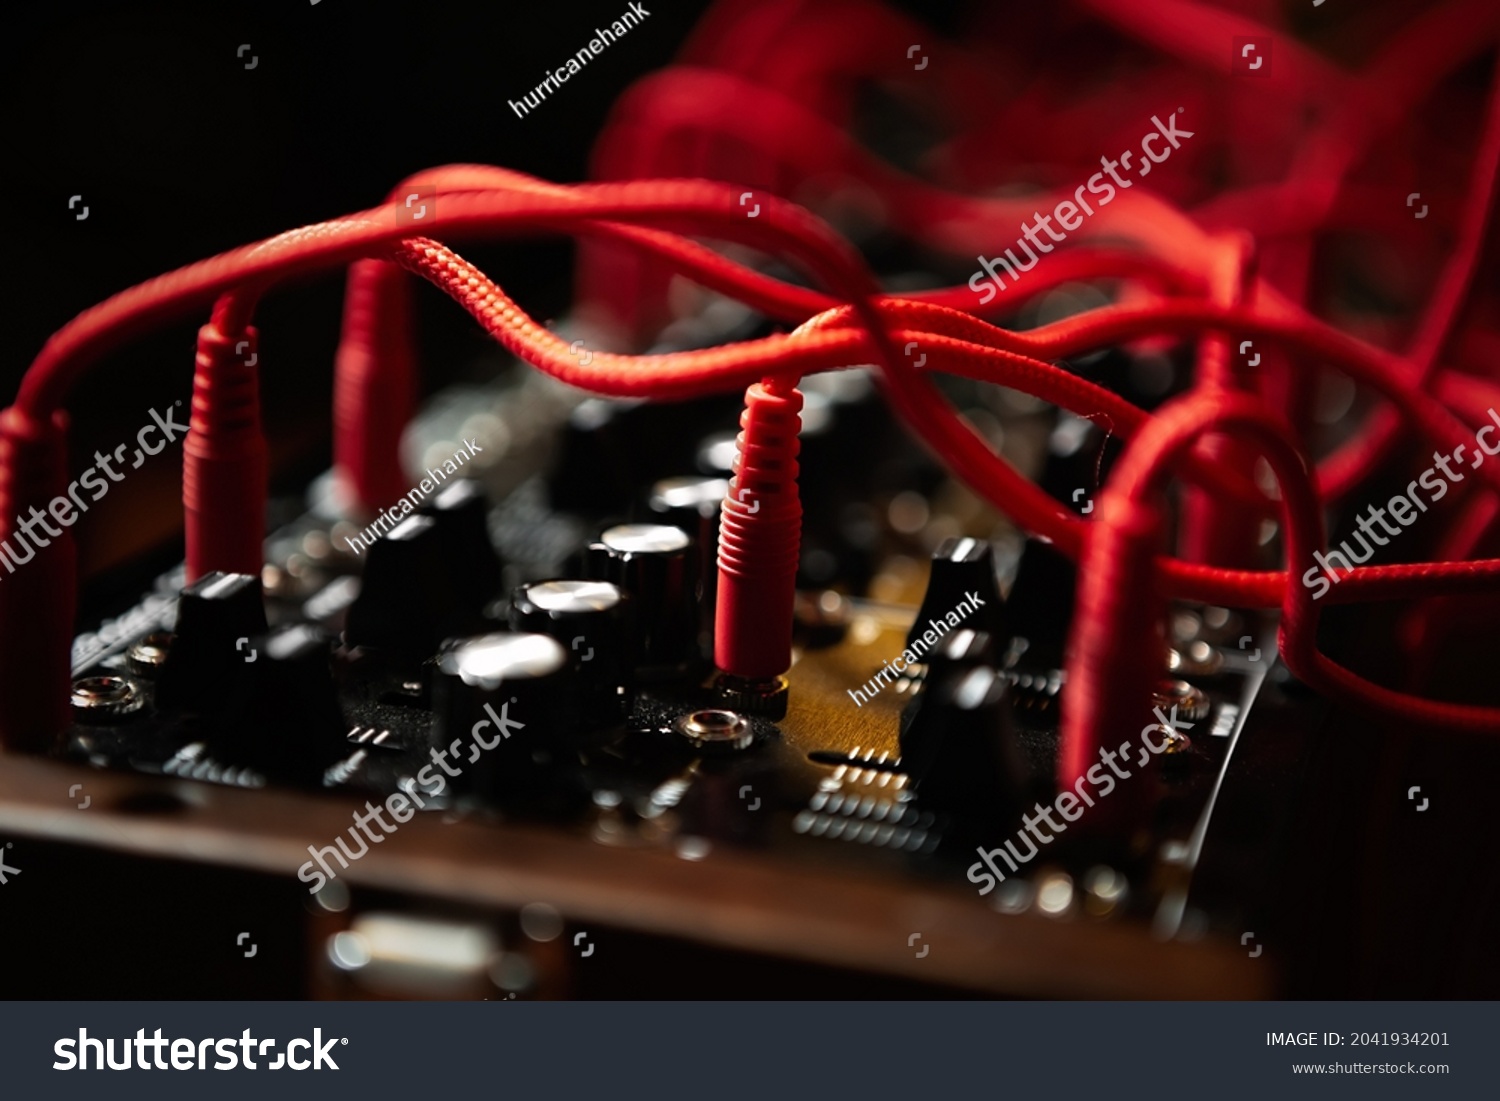 Analog synthesizer with audio cables. Professional modular synth device for electronic music production in sound recording studio #2041934201